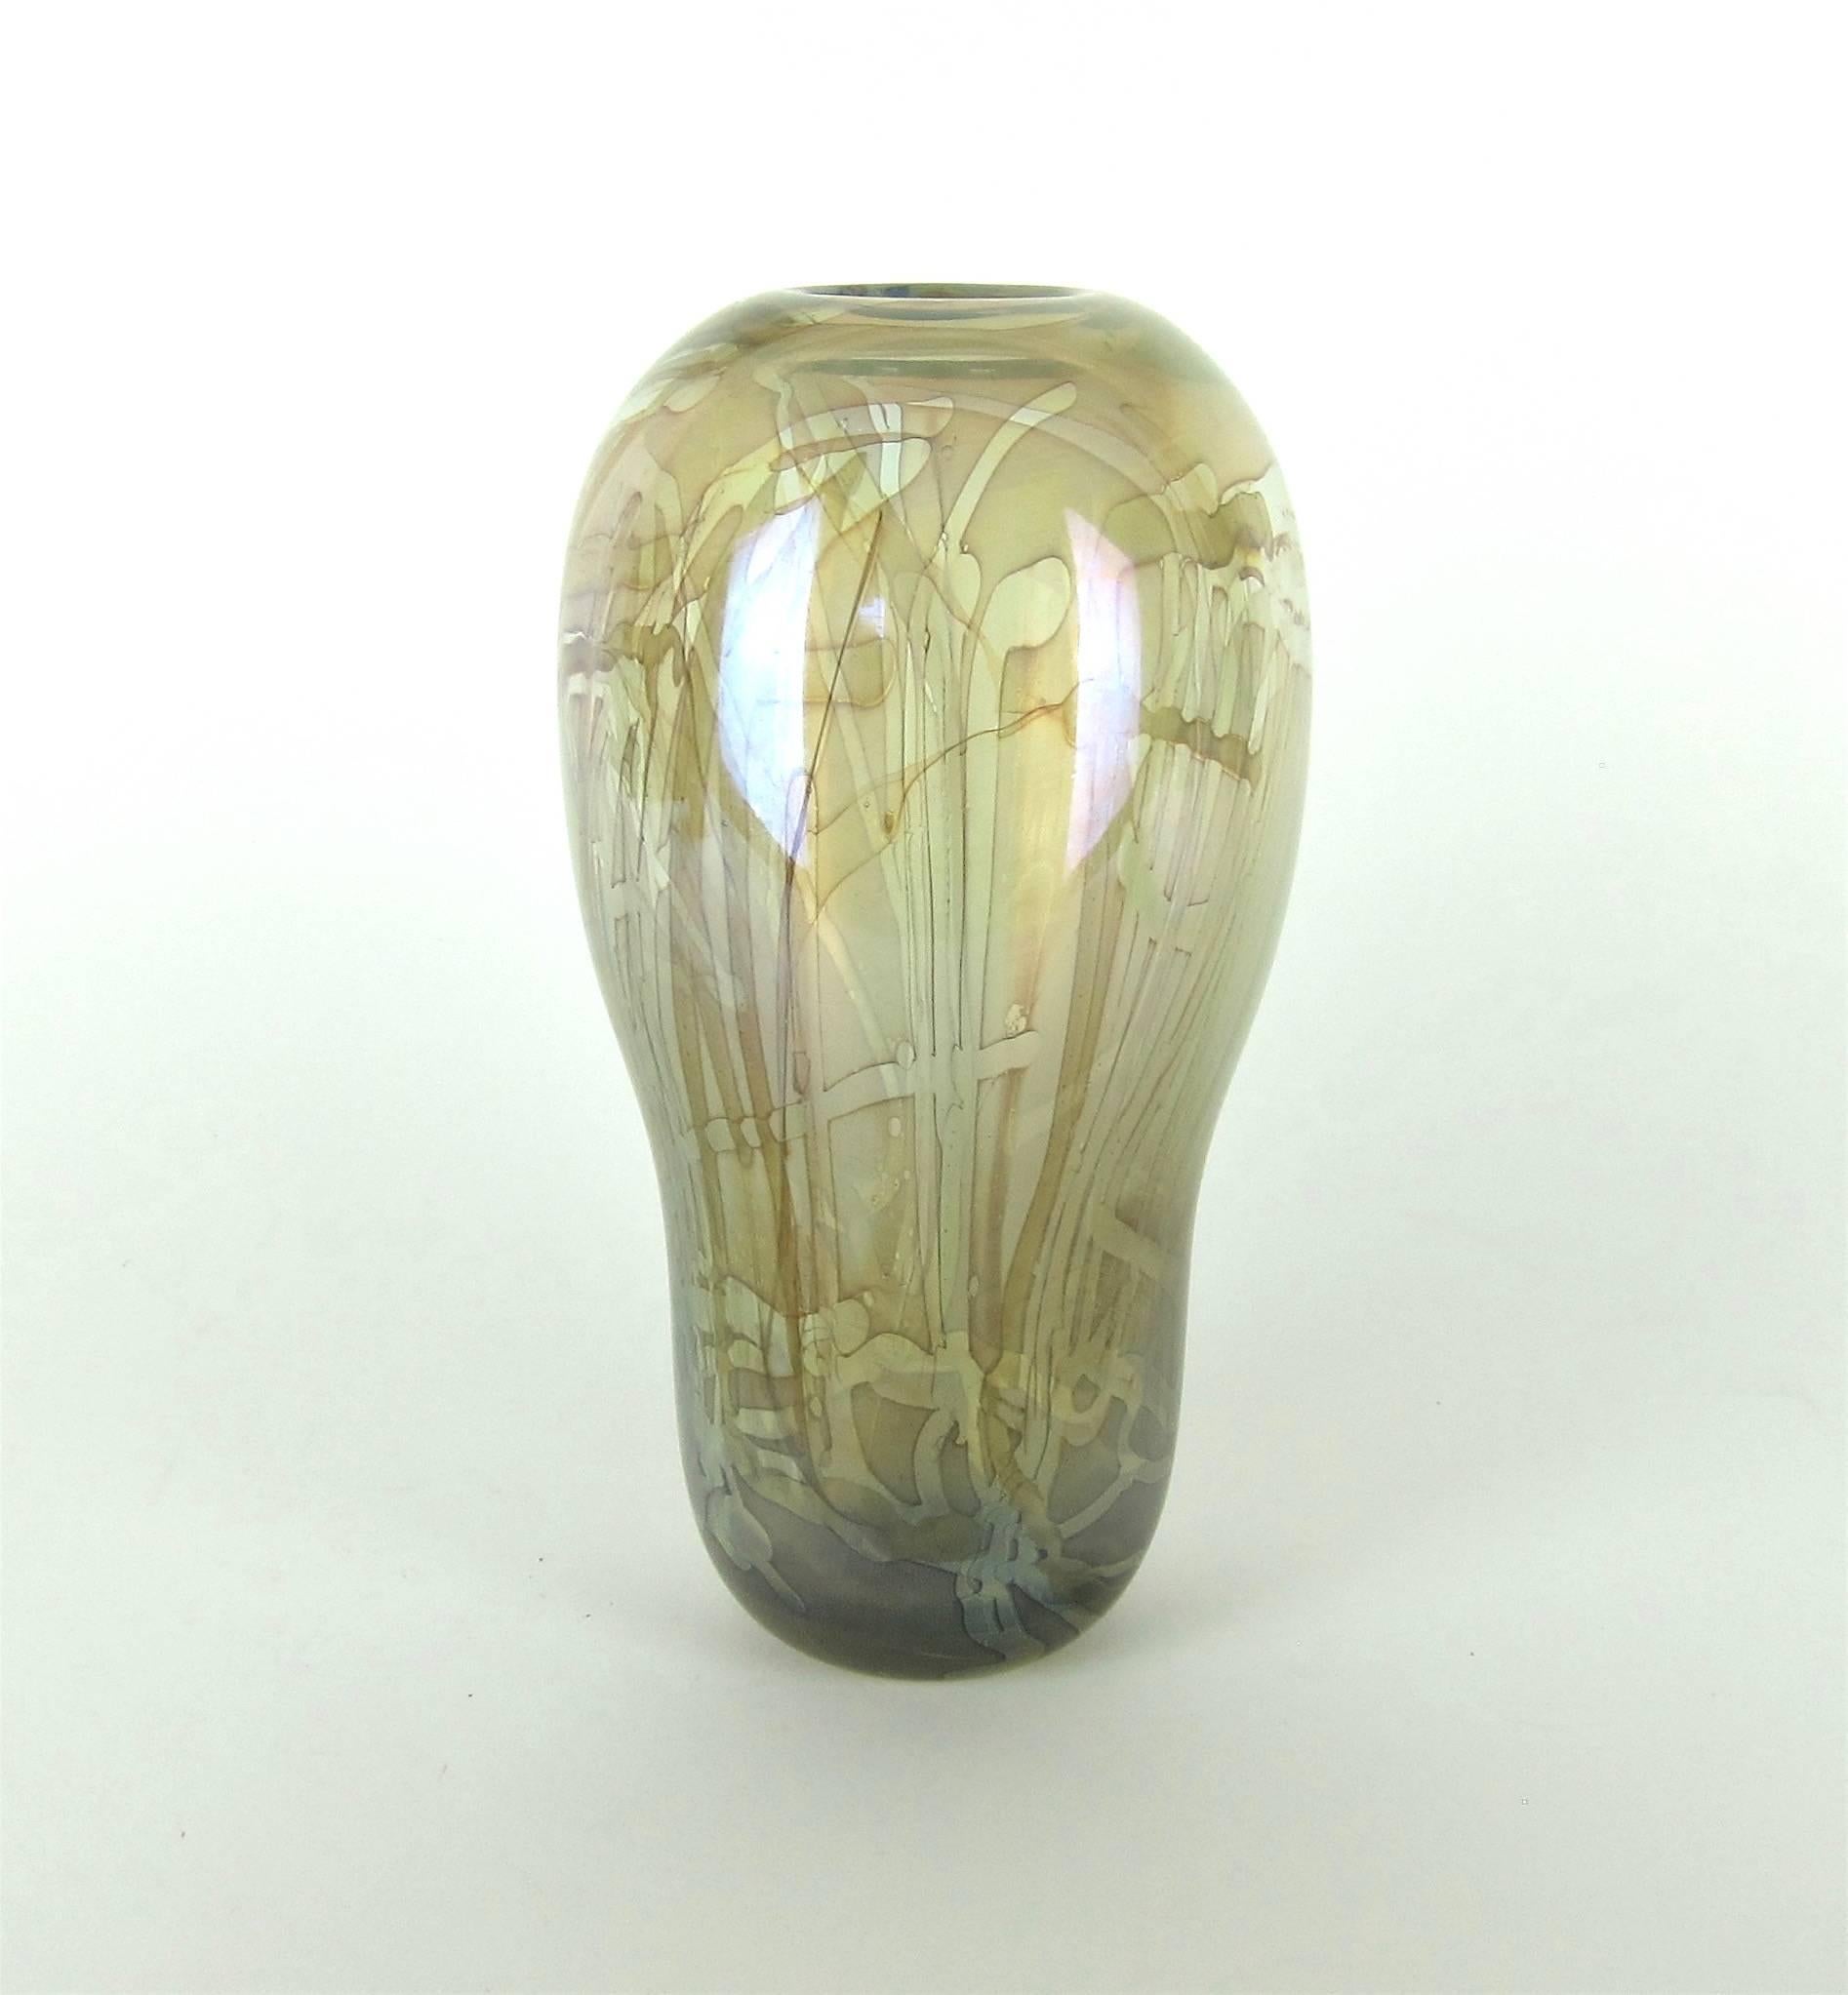 A signed and numbered American studio glass vase by Robert (Bob) William Bartlett (b. 1948) in neutral greens and browns with an overall iridescence. Much of the design is transparent with contrasting darker designs trailing down the body toward an